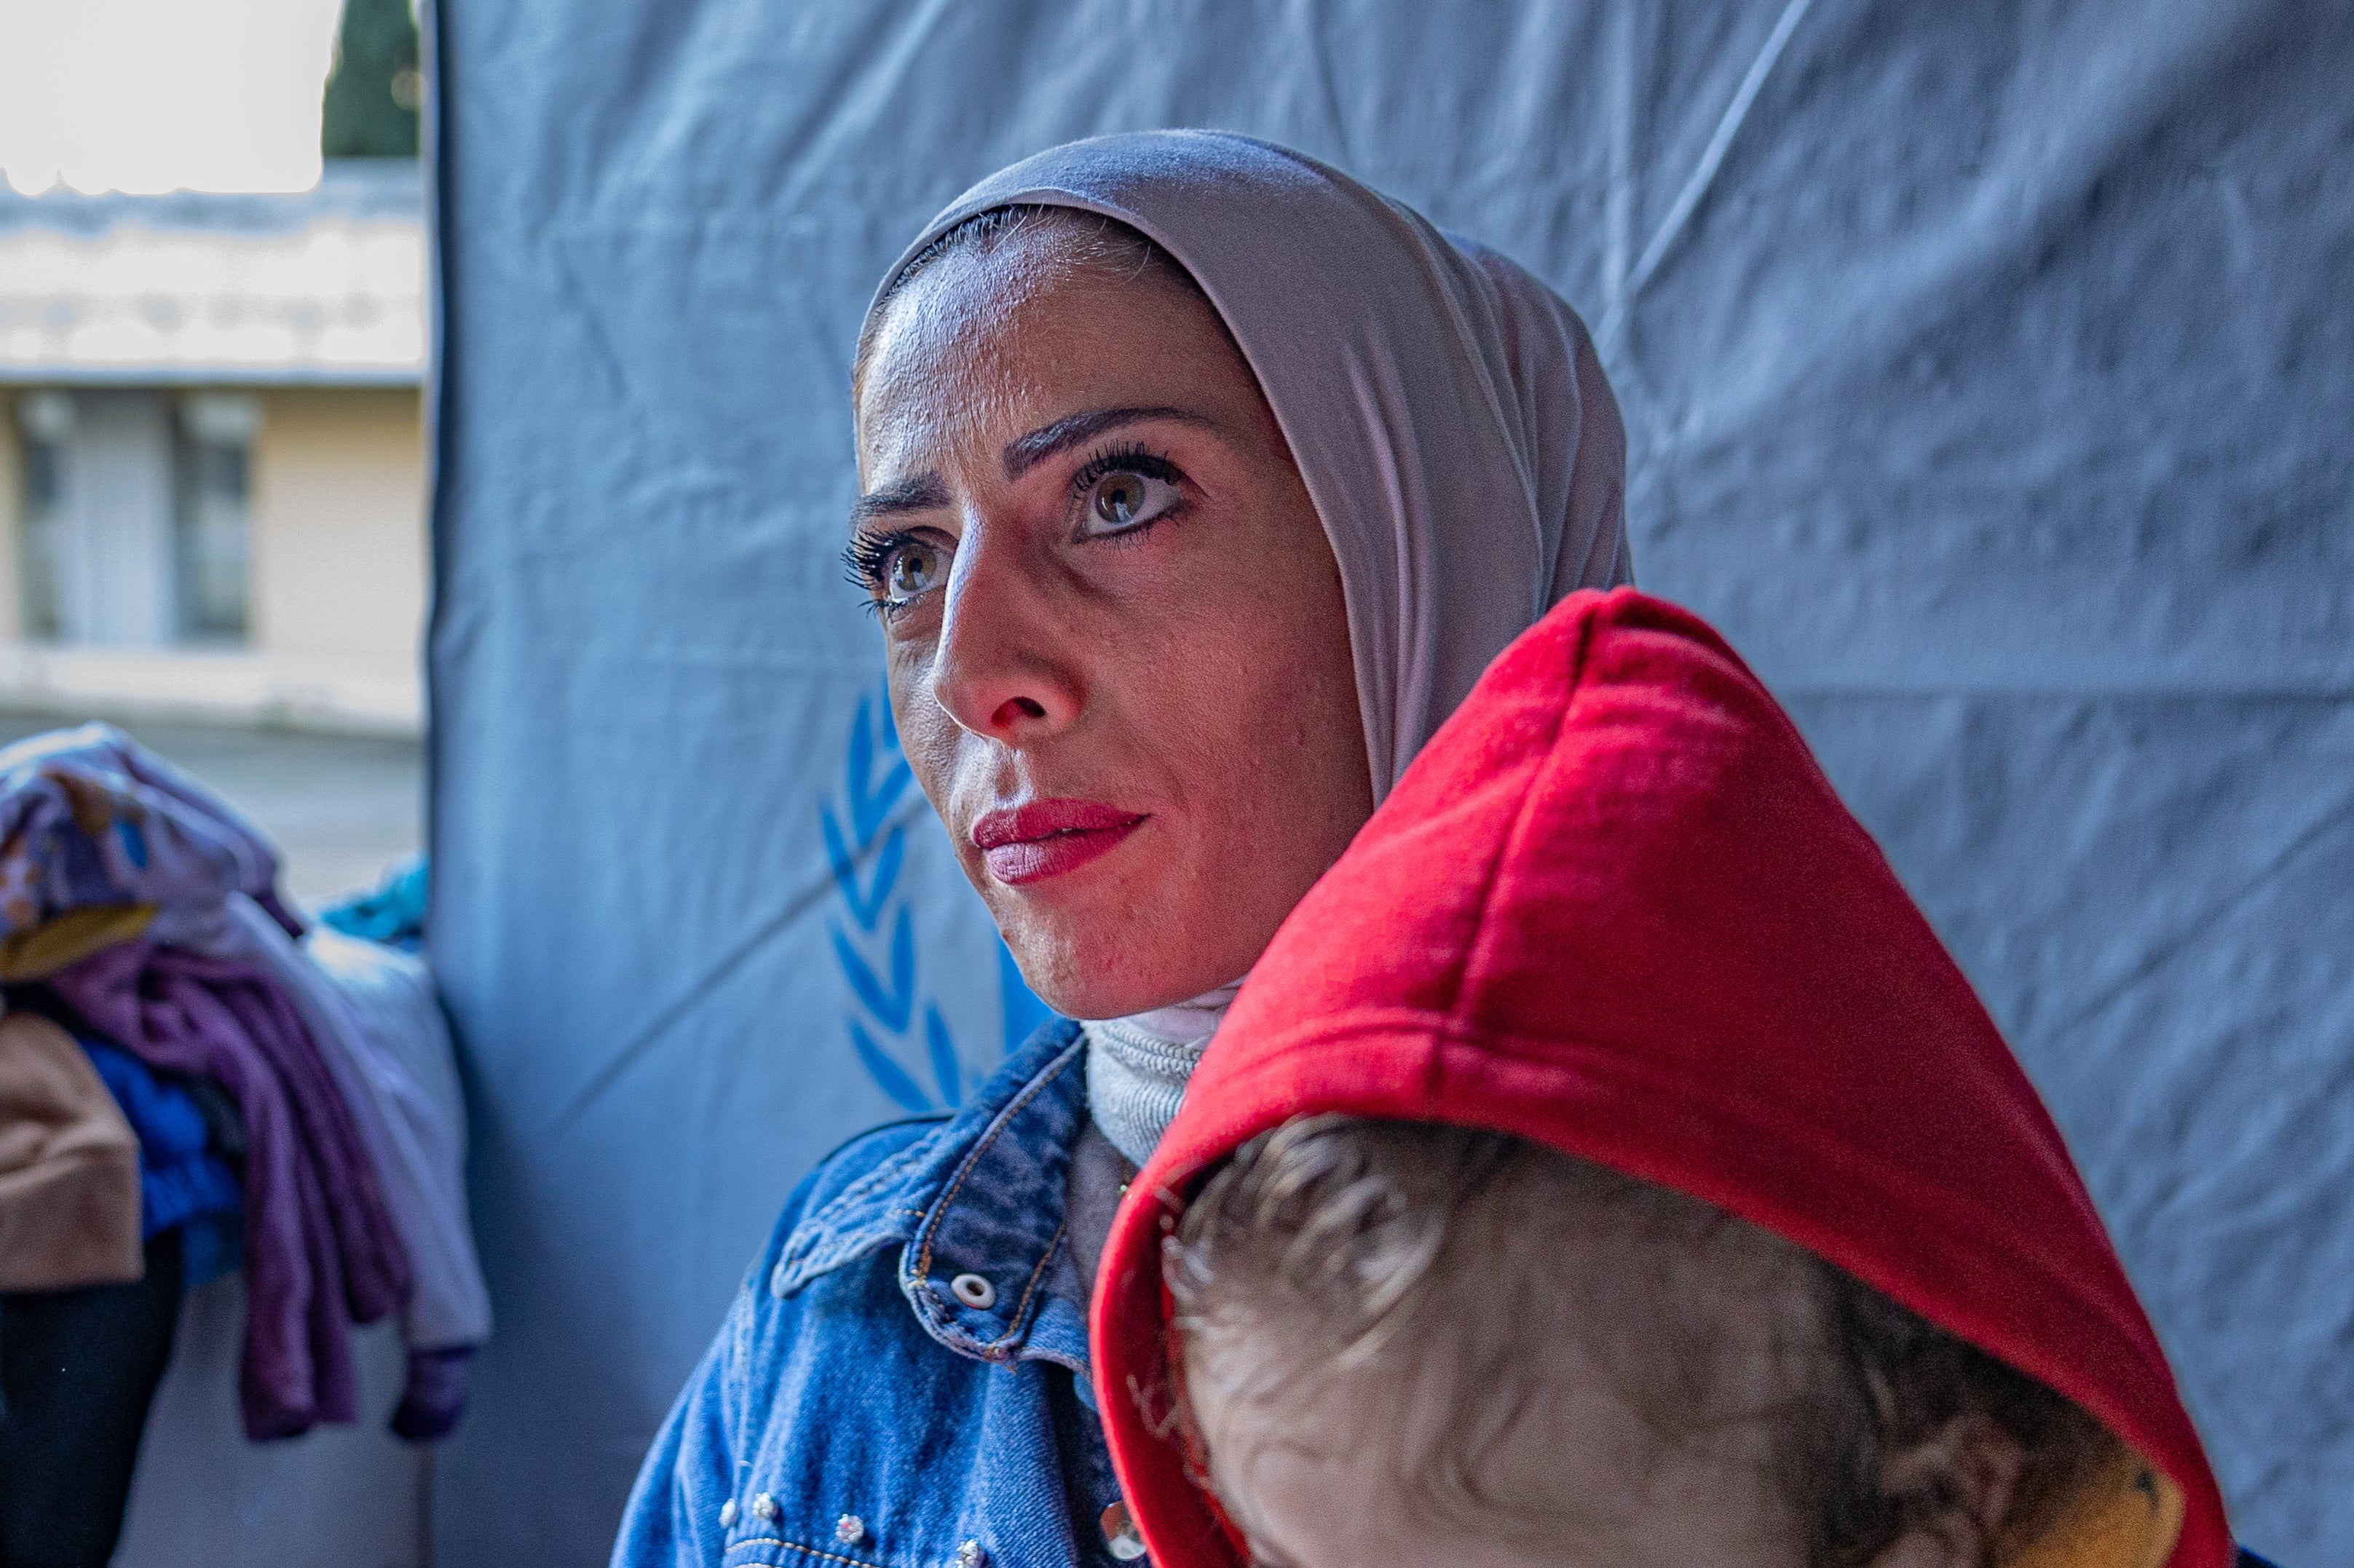 Asmaa fled from Syria’s civil war to Lebanon and has now had to flee her home on the border thanks to clashes between Israeli forces and Hezbollah